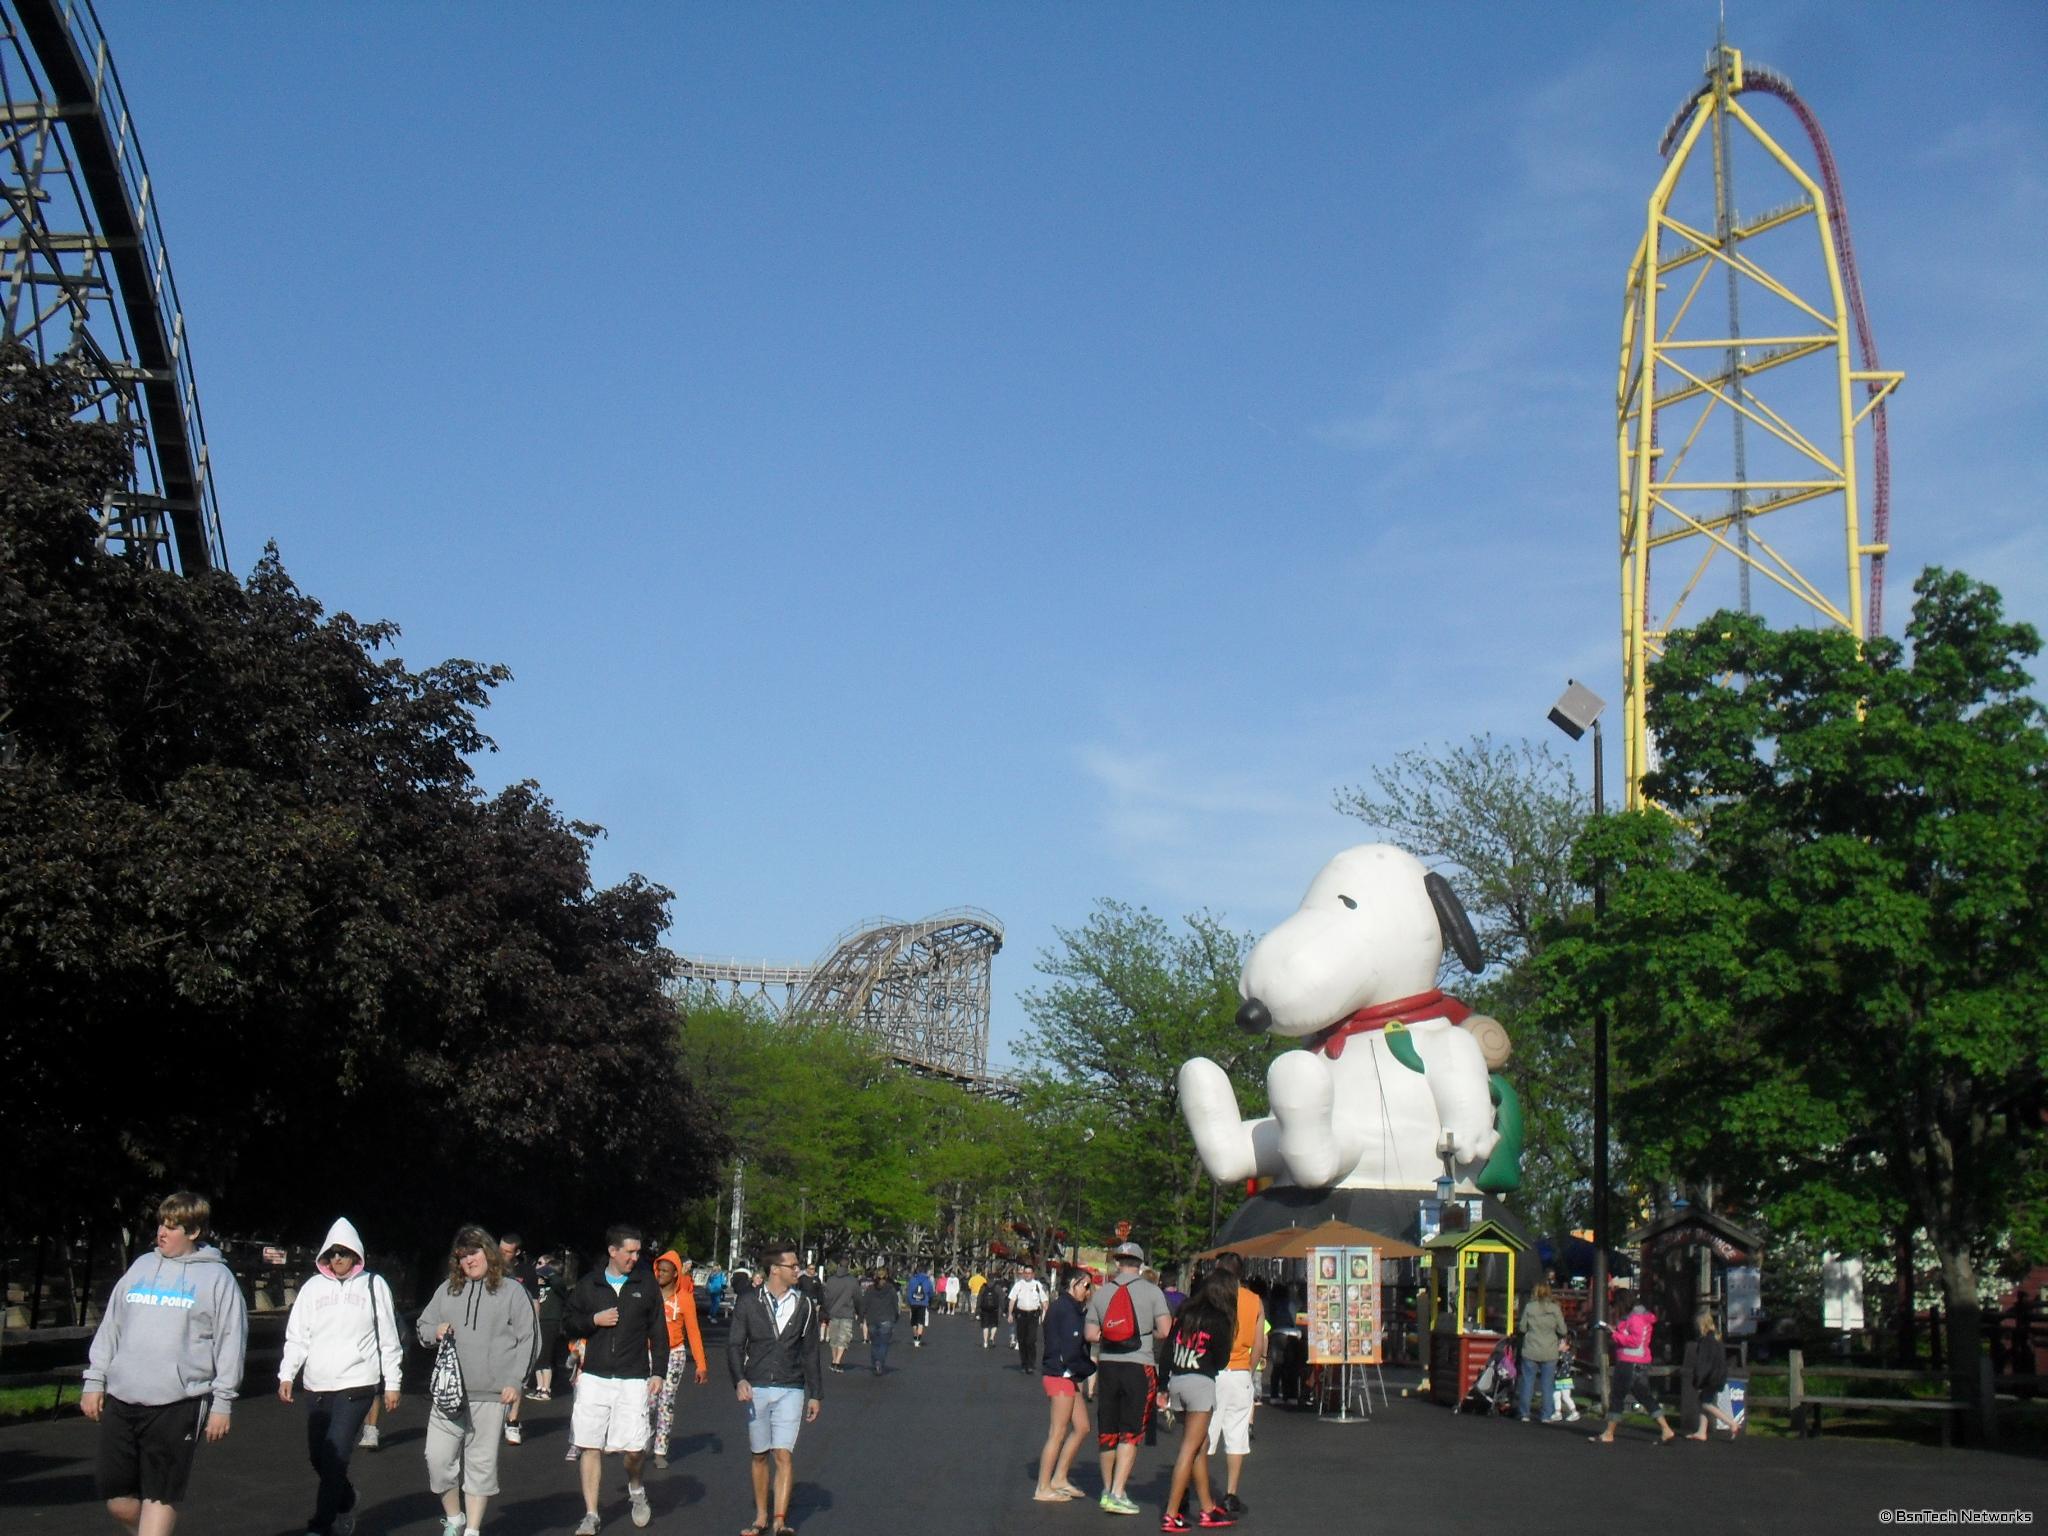 Fairway by Top Thrill Dragster